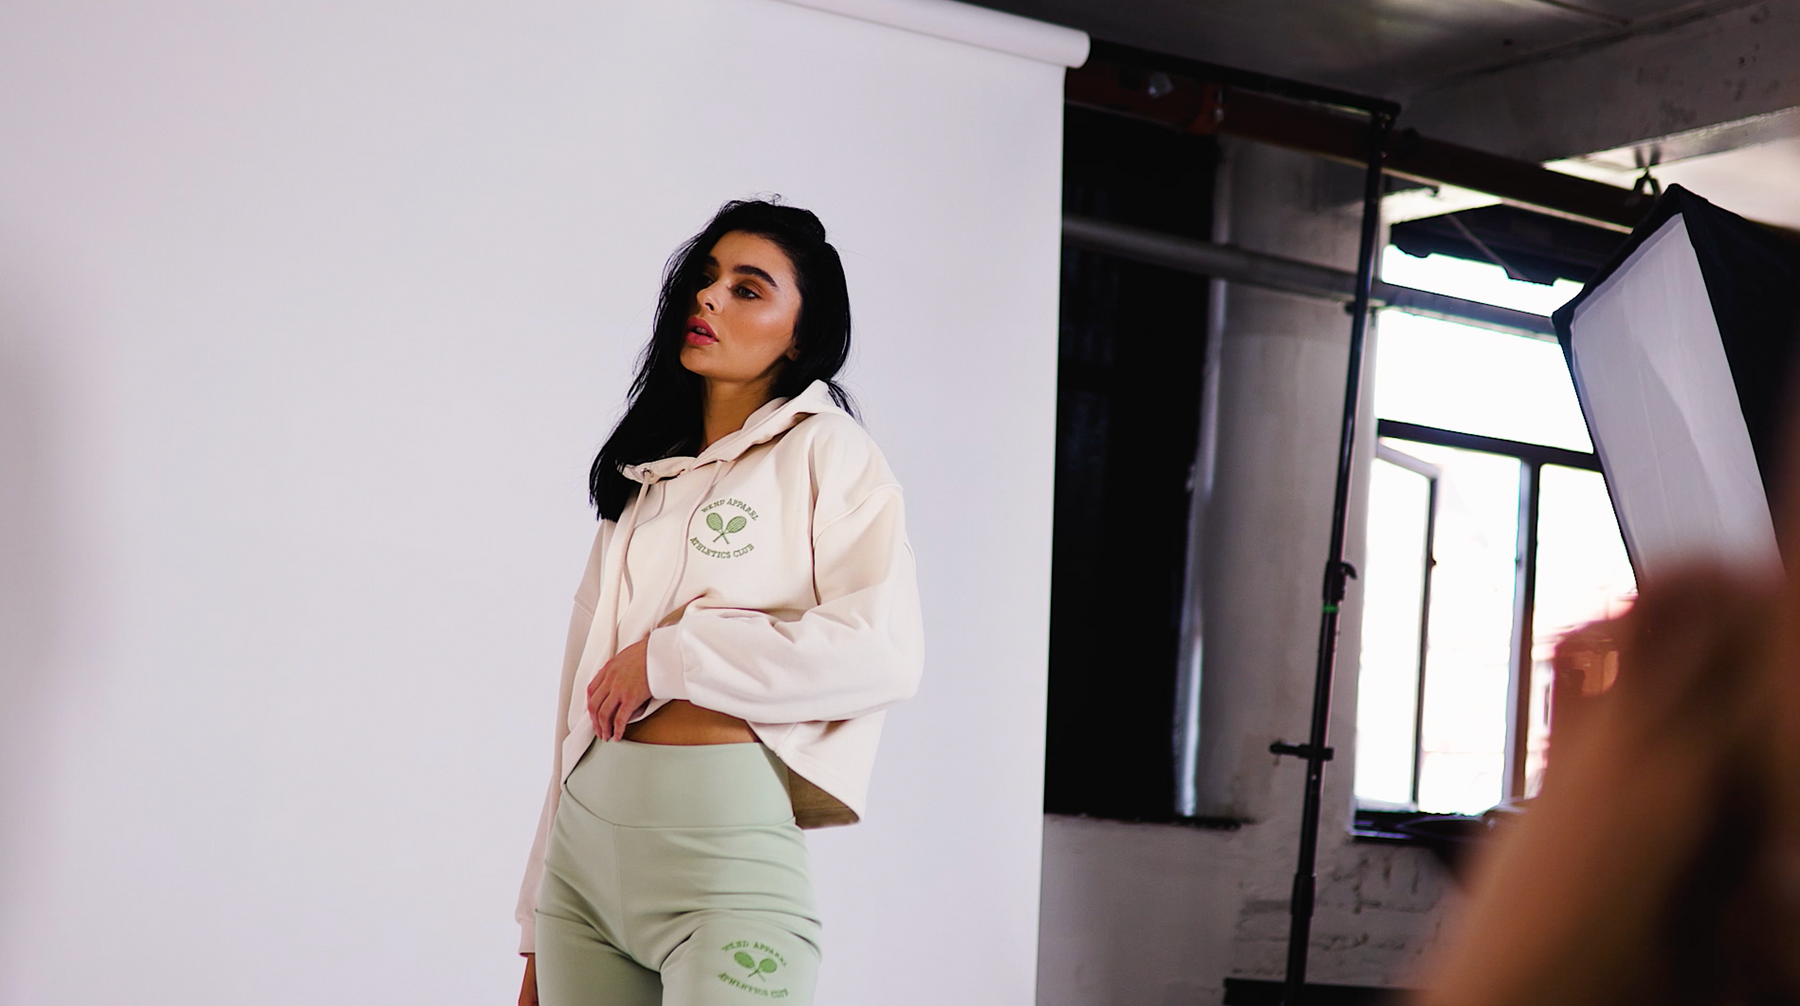 behind the scenes at the ss21 shoot in manchester. model is wearing a hoodie in eggnog and cycling shorts in jade green